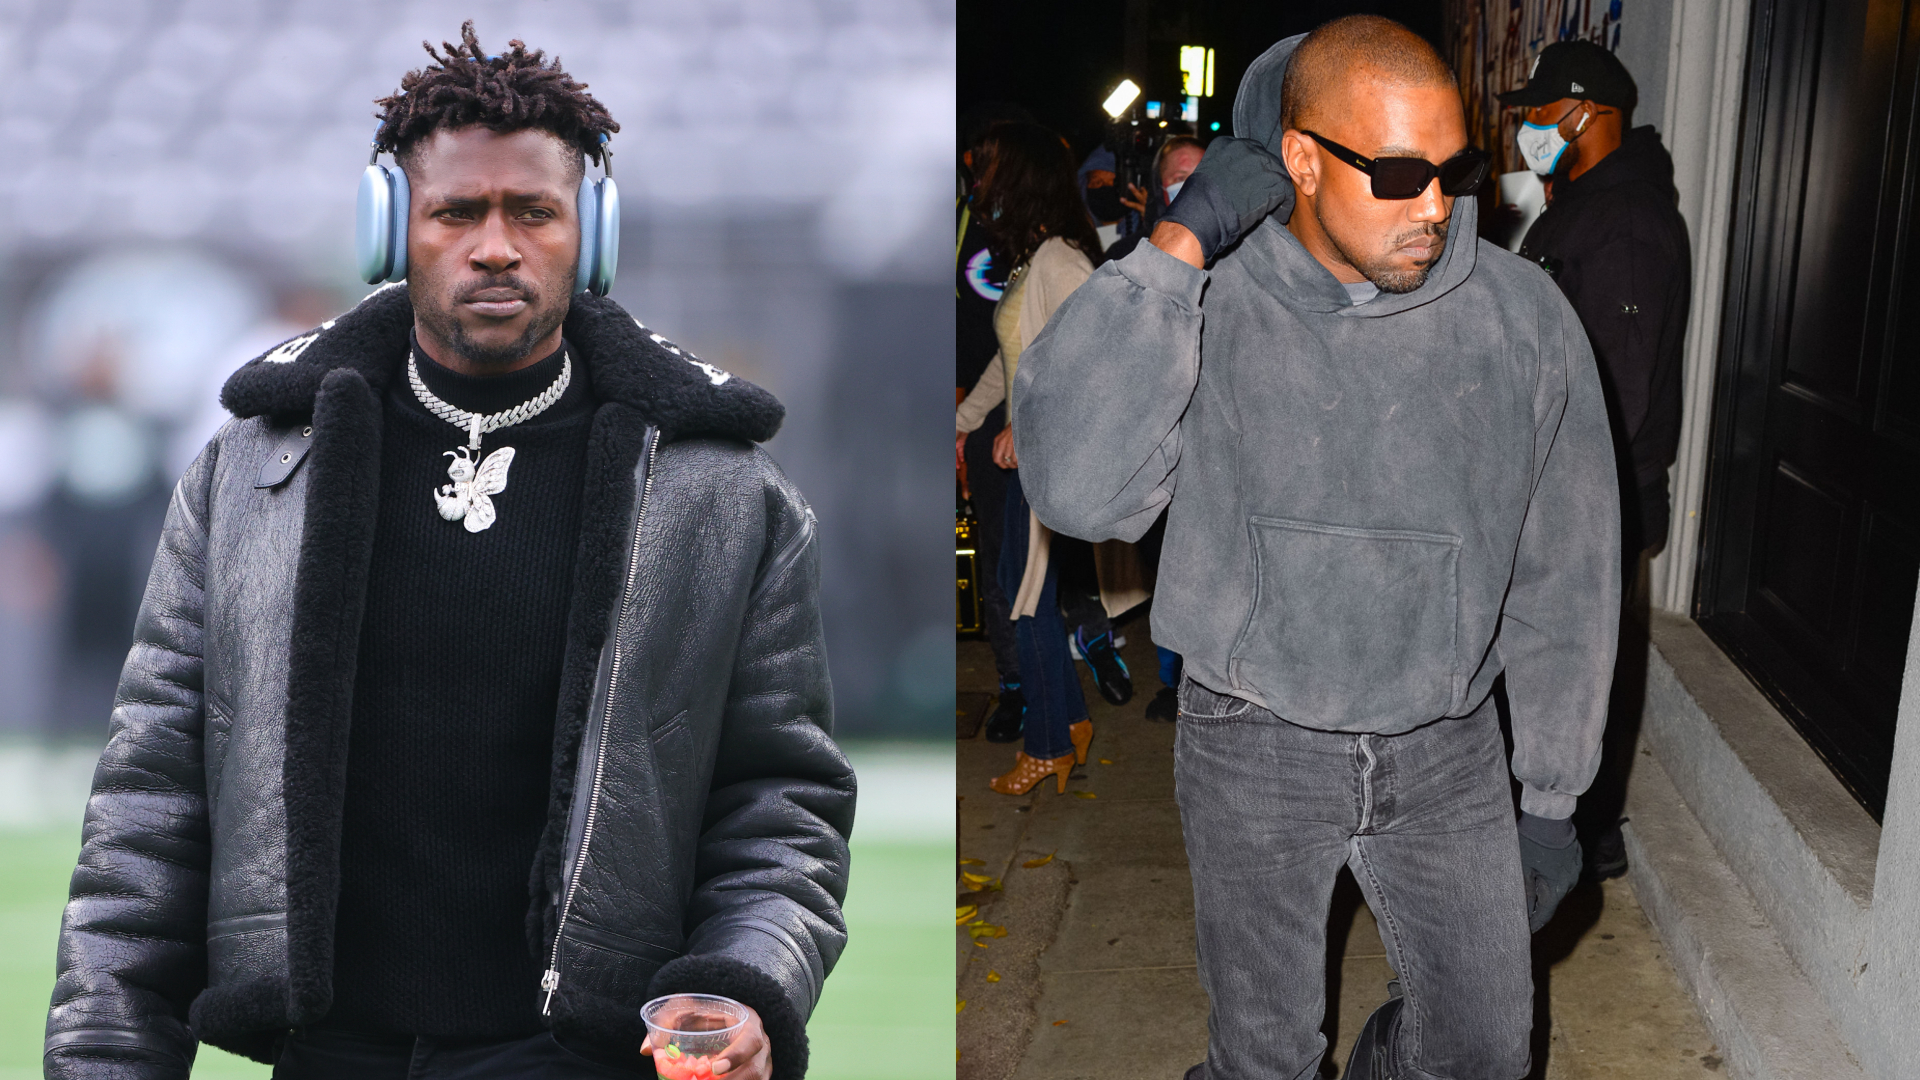 Overanalyzing This Picture of Antonio Brown & Kanye West